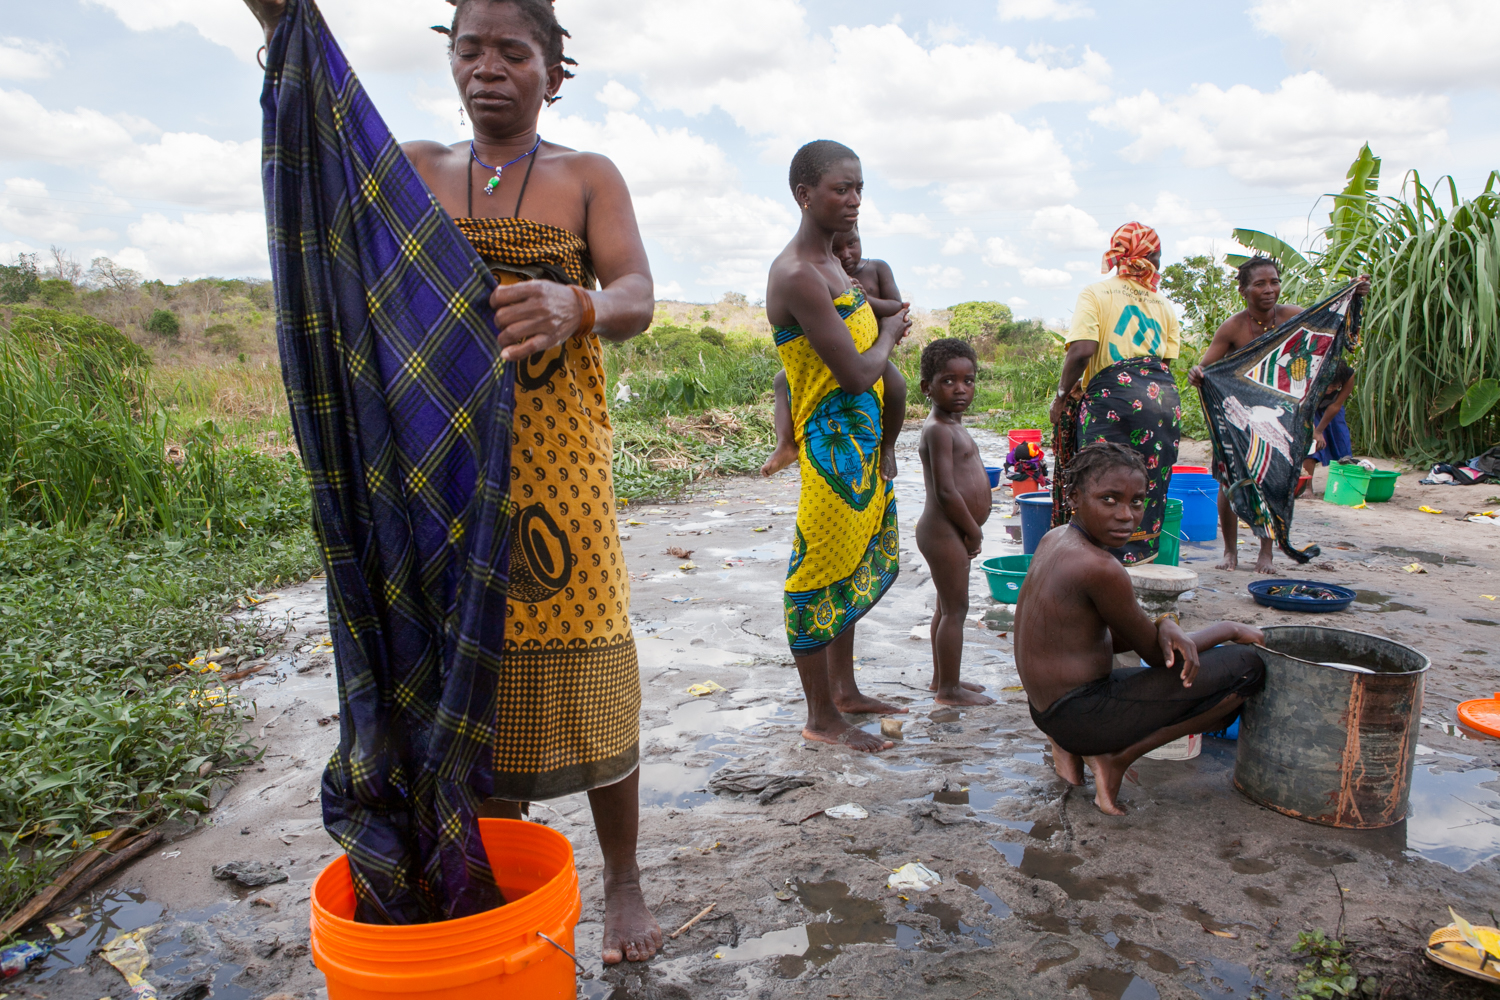  When pumps are not working, locals use nearby rivers and swamps to do laundry and bathe themselves. It is possible that wildlife or waste streams contaminate the water, thus increasing the dangers of widespread disease. 